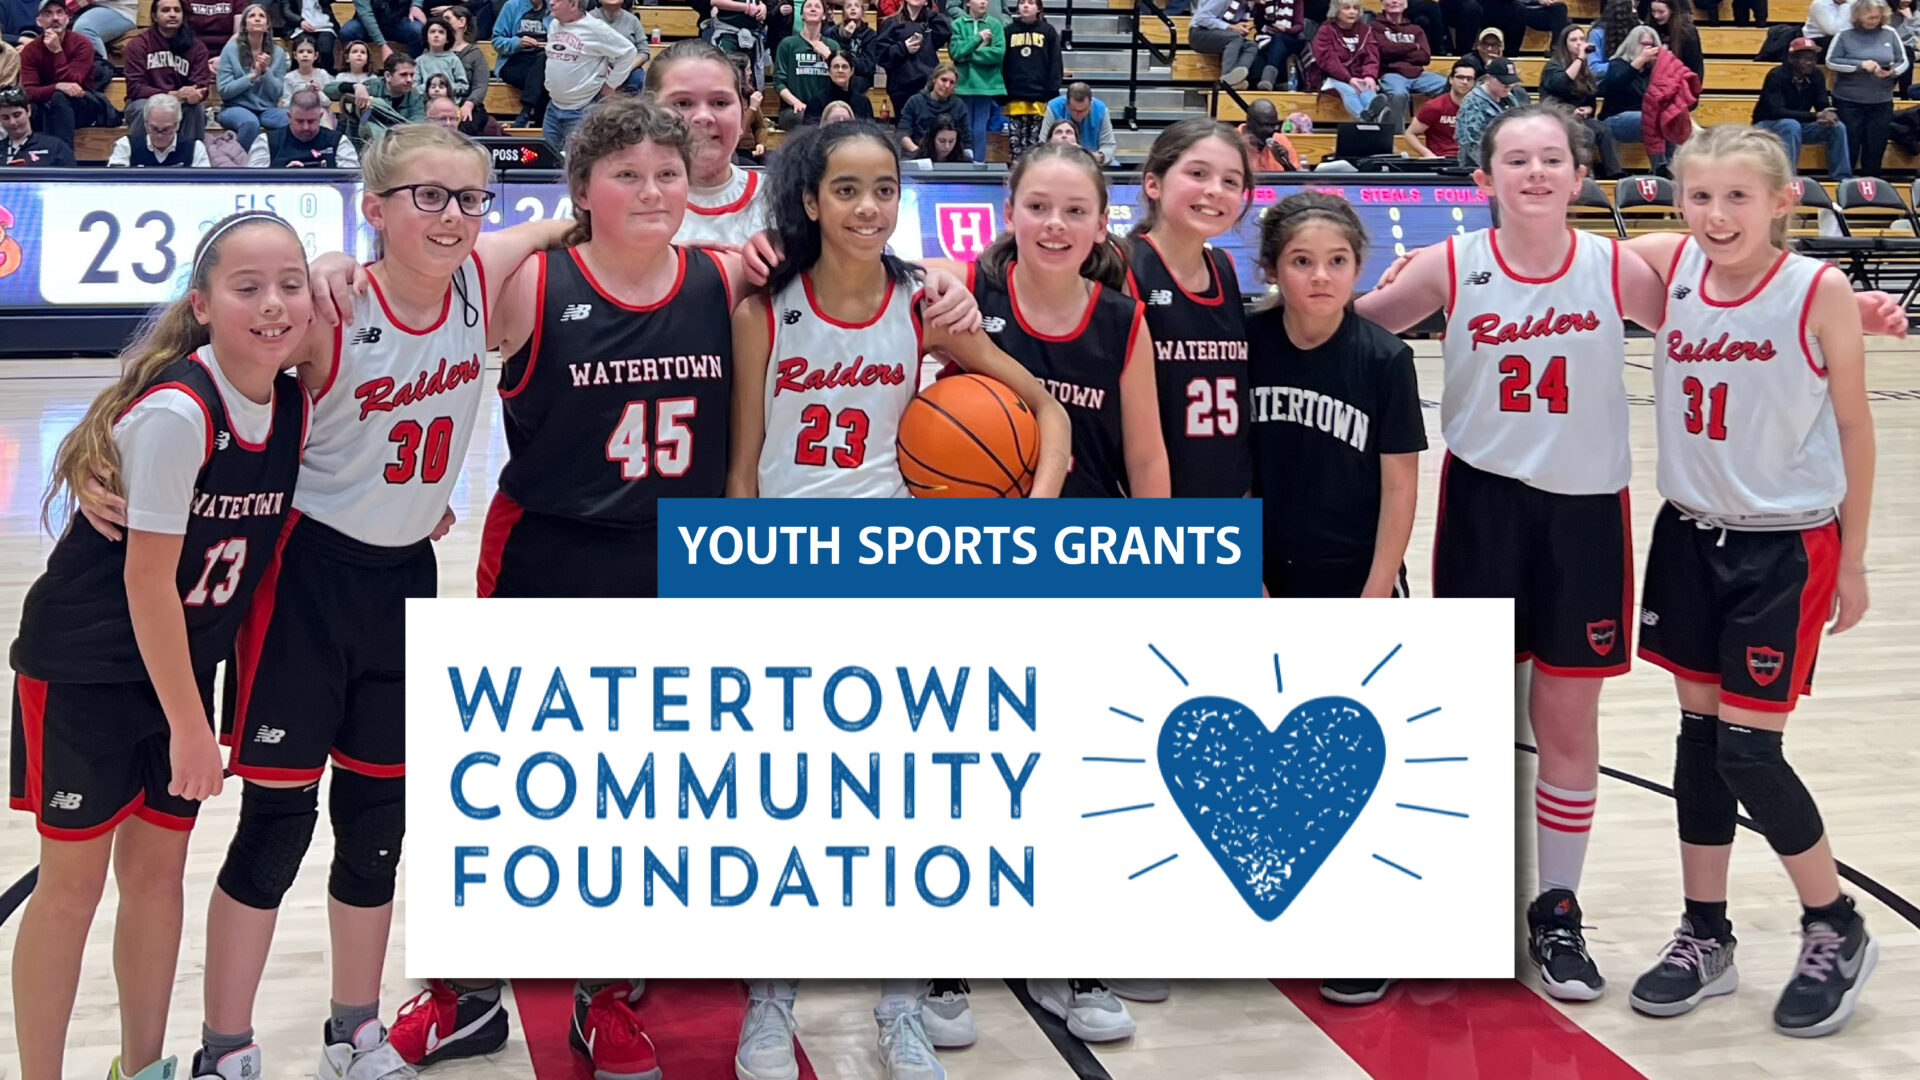 Watertown Community Foundation Helping to Pay Youth Sports Registration Fees for Local Families